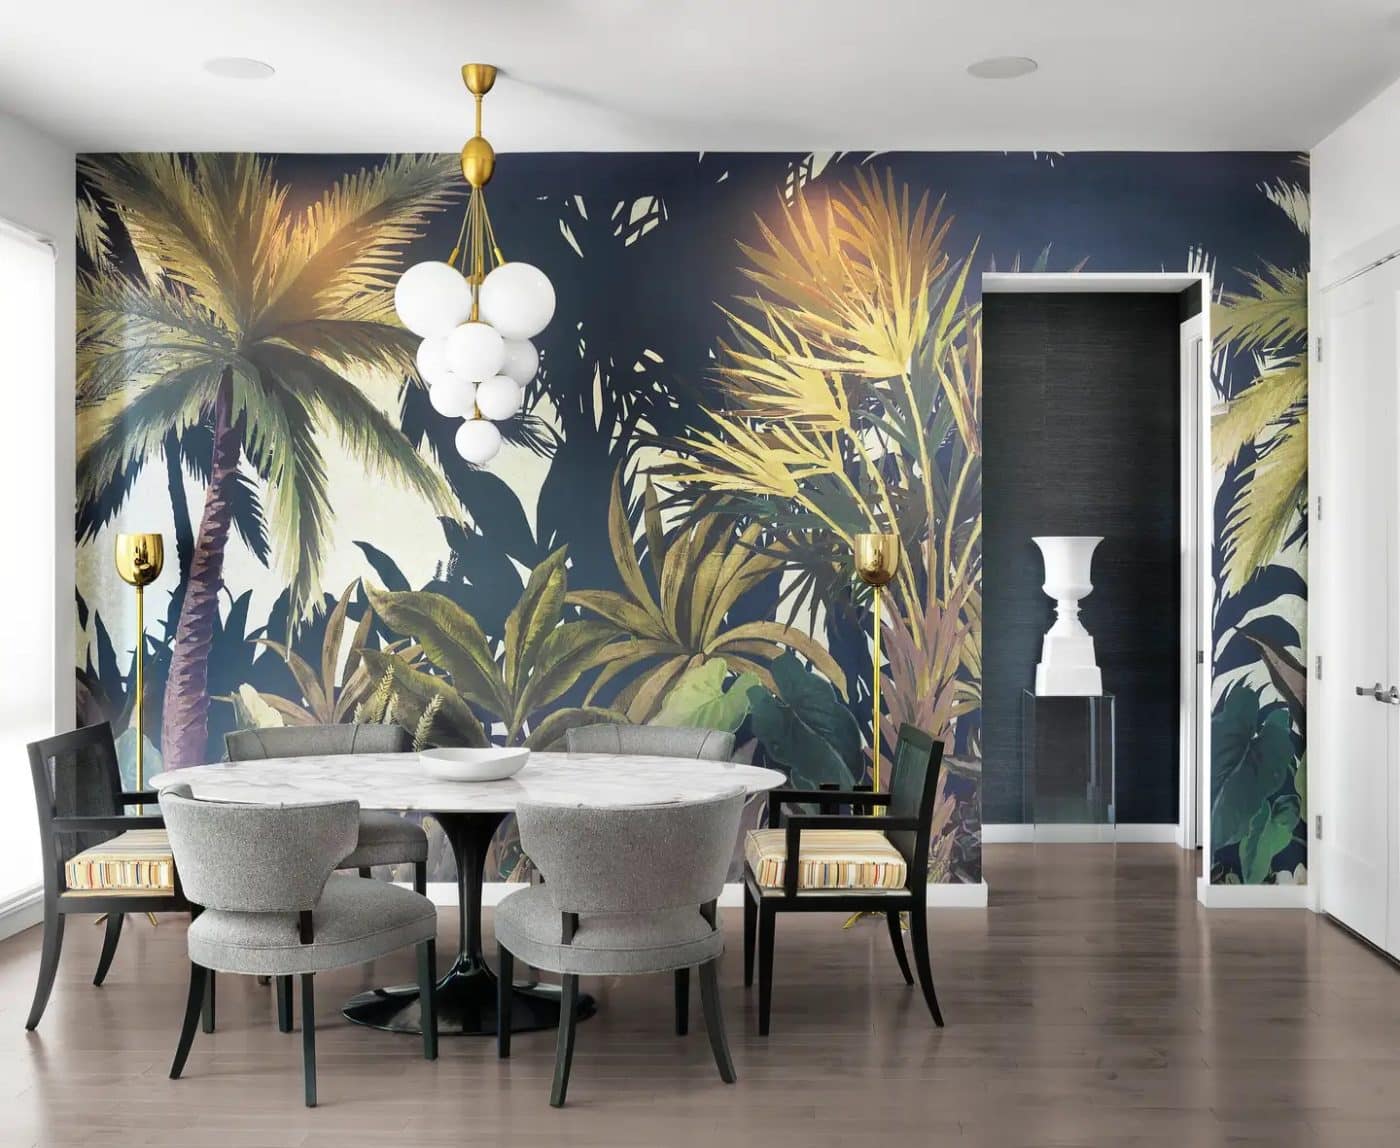 A St. Louis dining room designed by Jacob Laws with a tropical-print wallpaper mural 